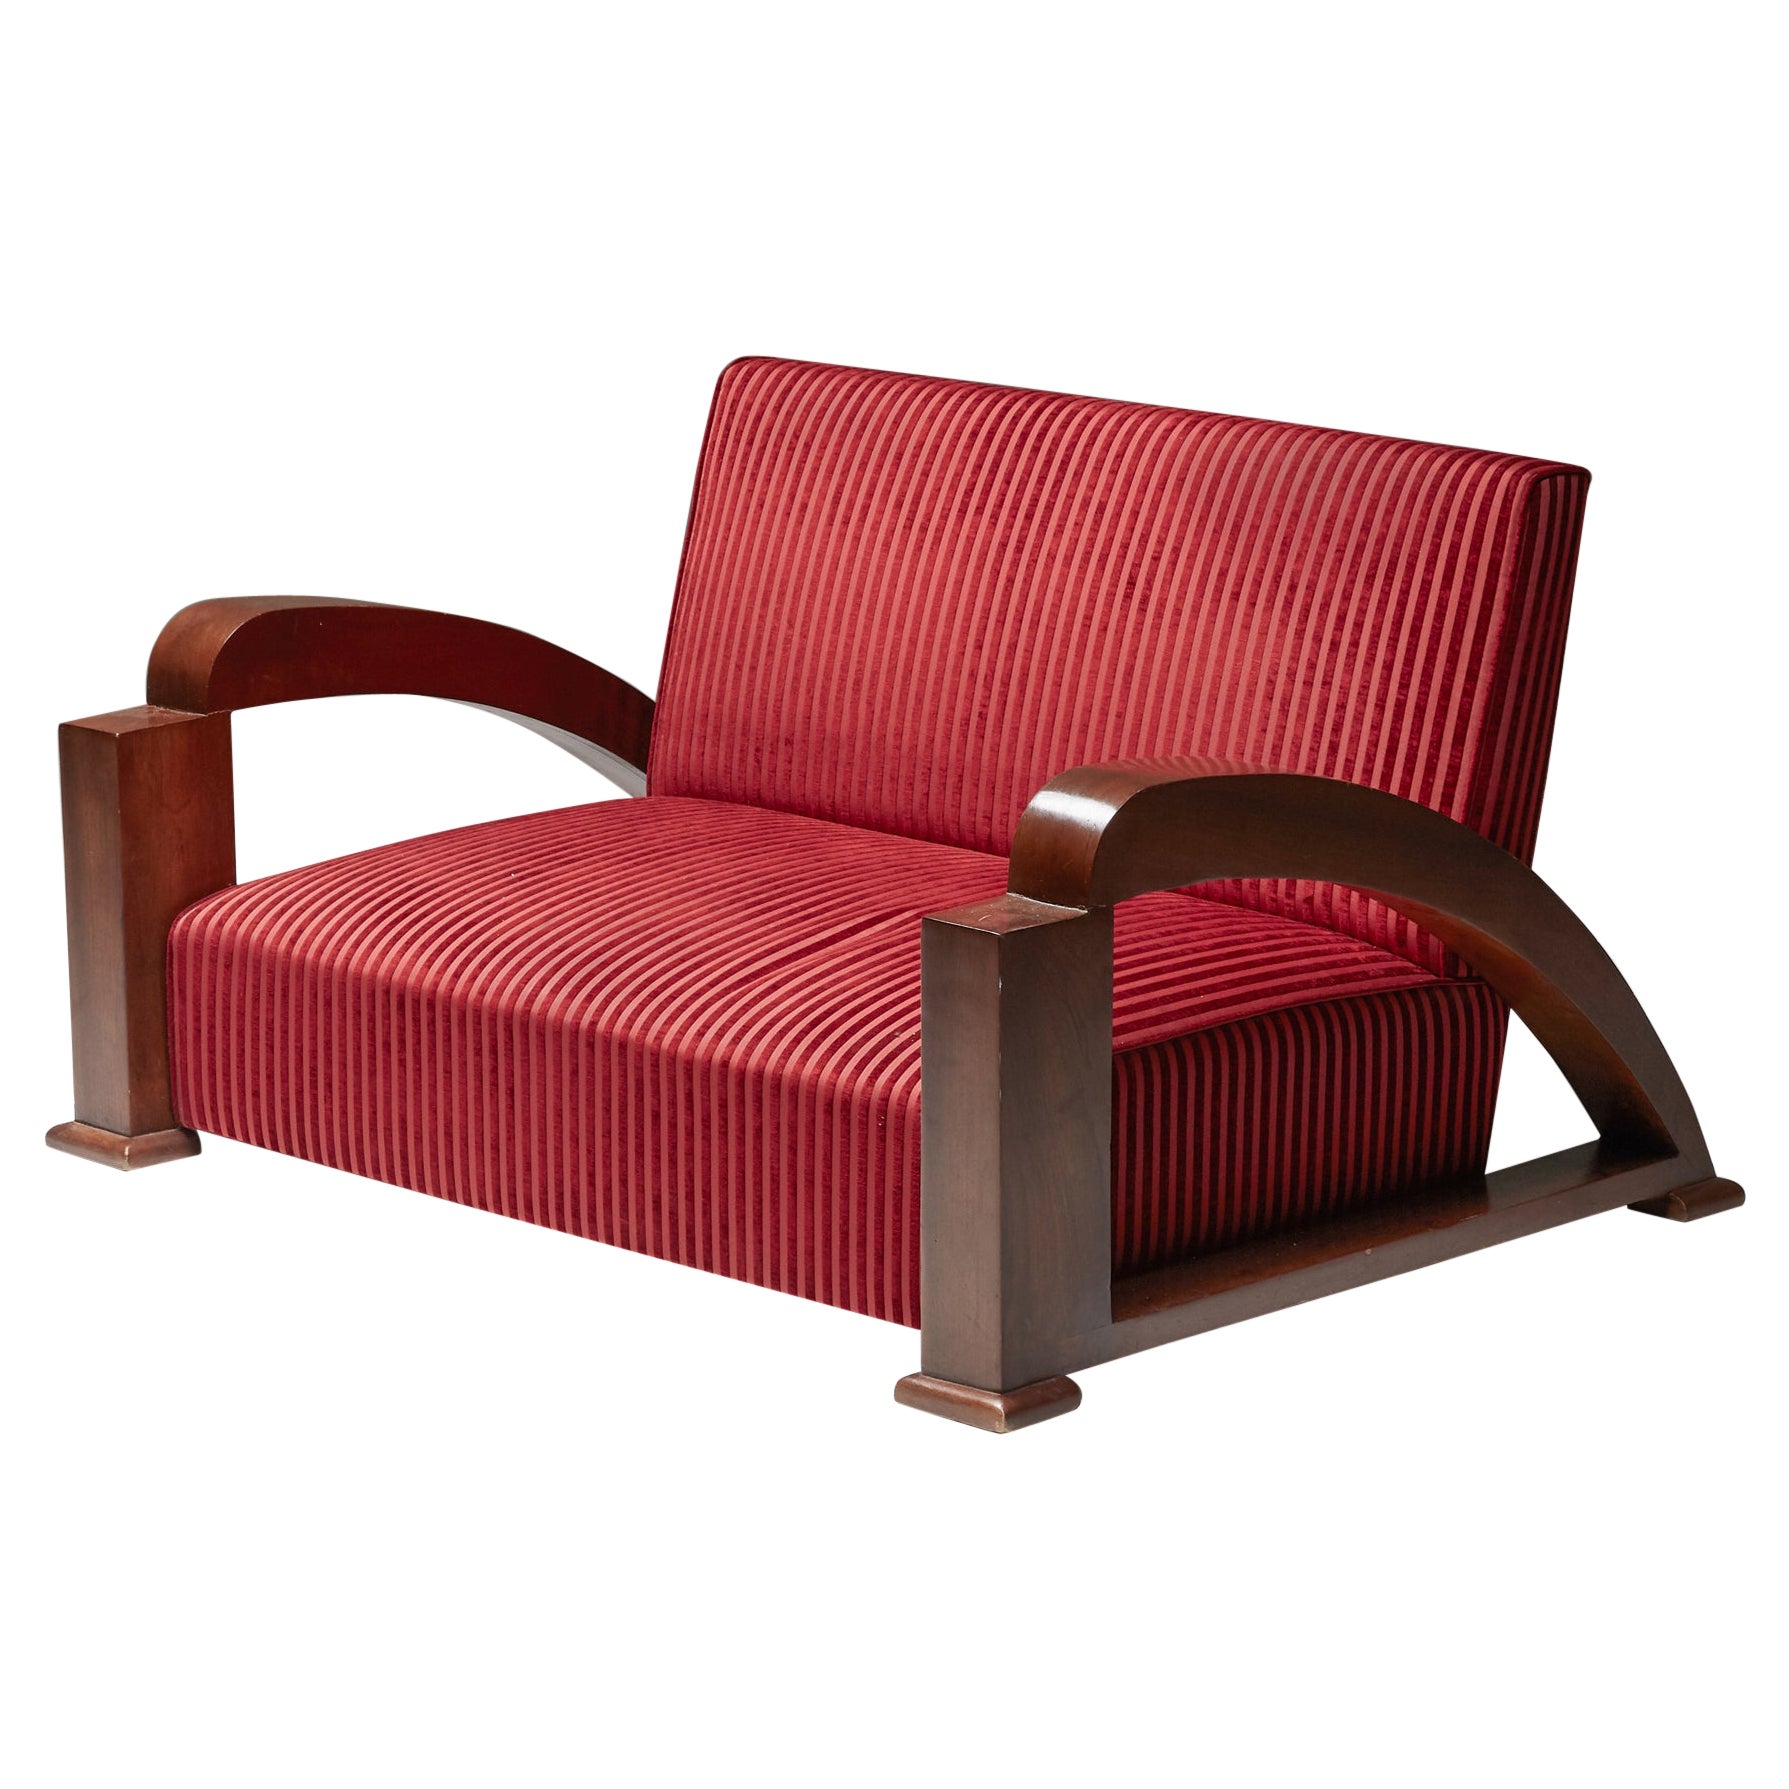 French Art Deco Sofa in Red Striped Velvet and with Swoosh Armrests